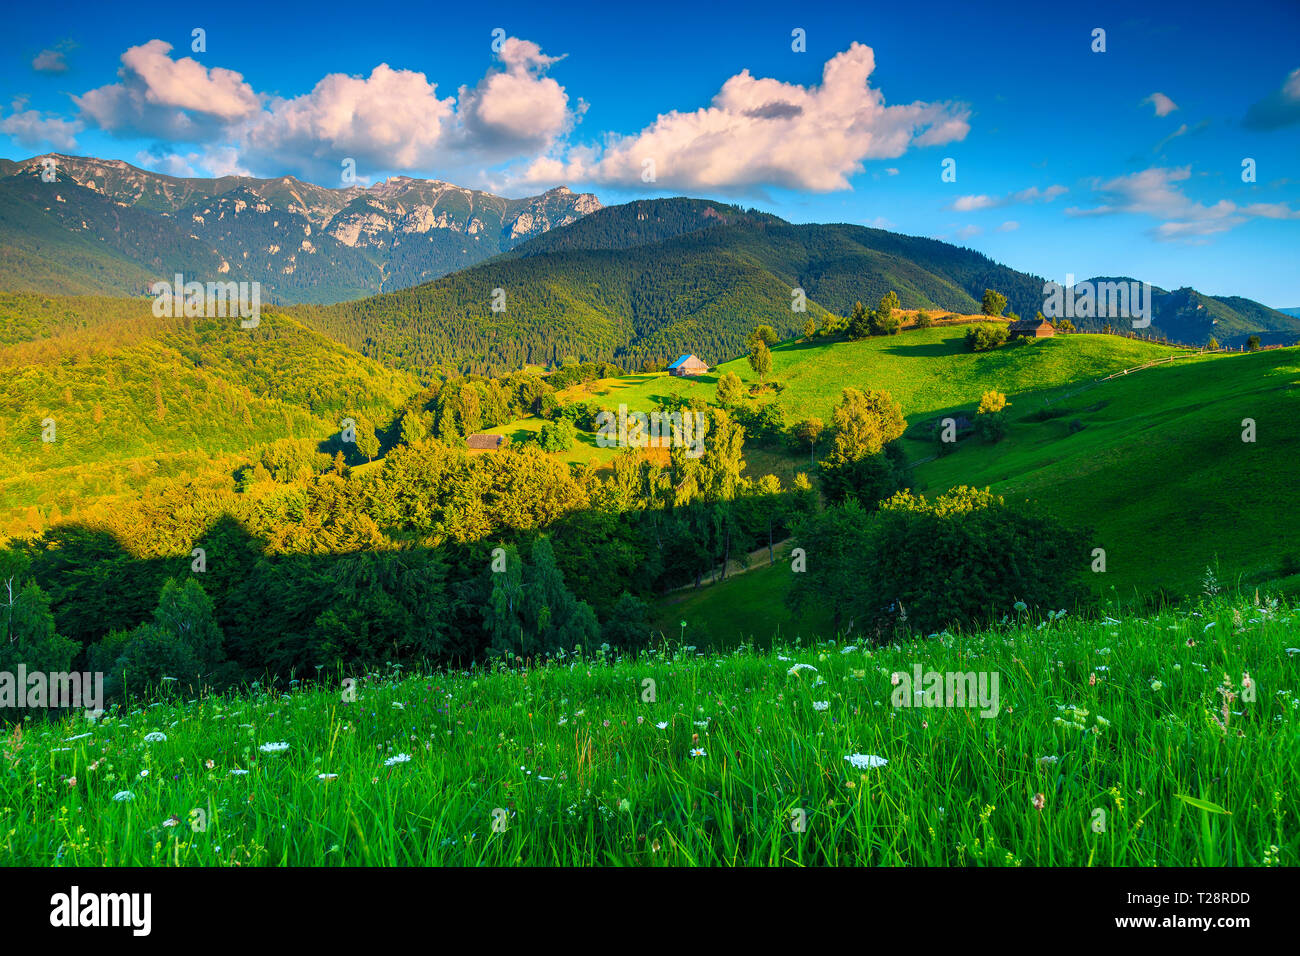 Wonderful summer alpine landscape with green fields and high mountains at sunset, Bran, Transylvania, Romania, Europe Stock Photo